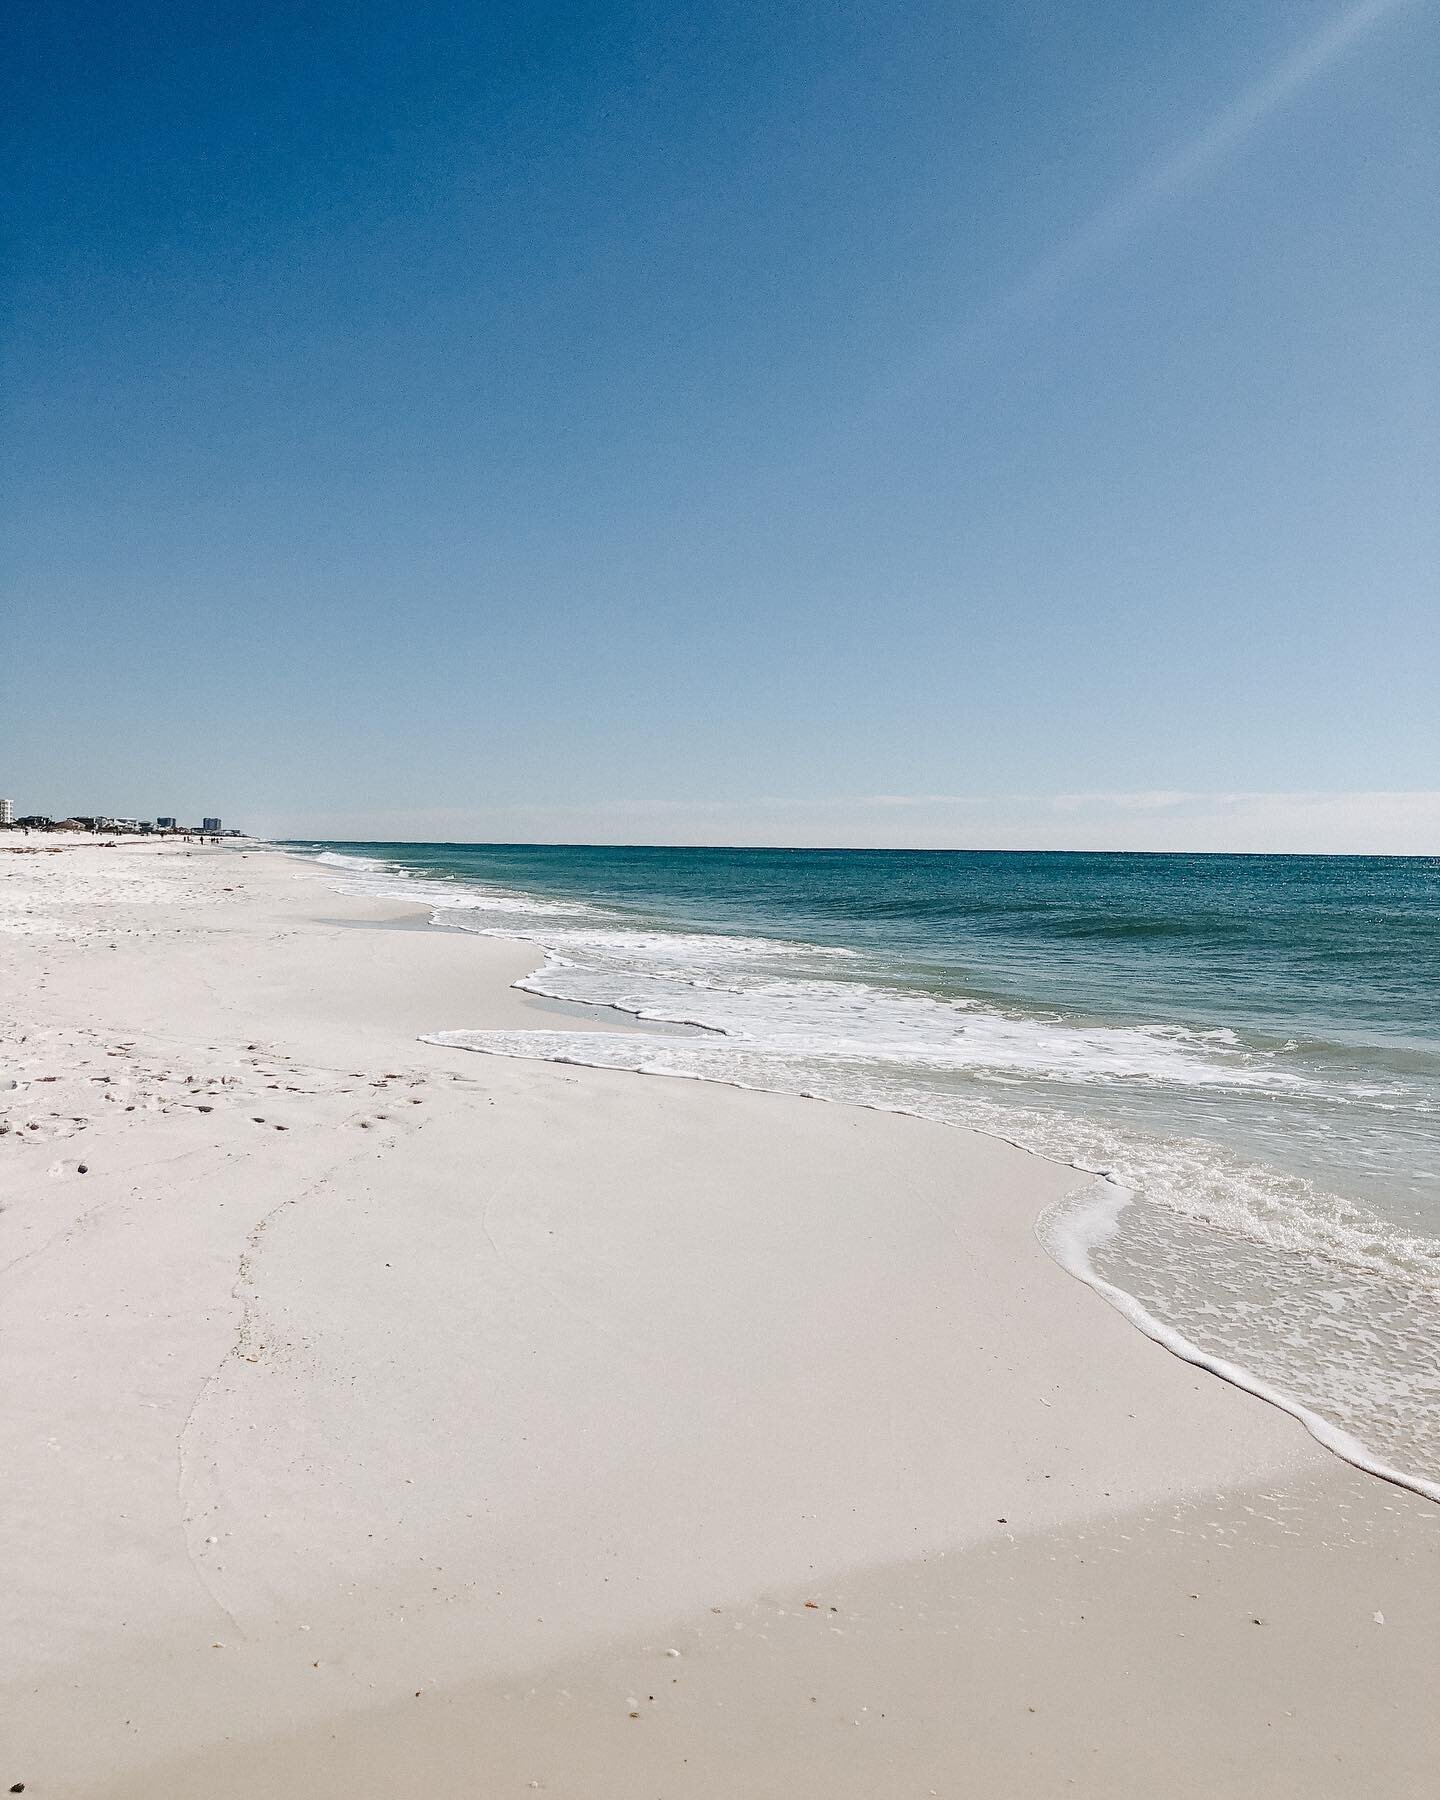 CROSS COUNTY ROAD TRIP: Day 9 Pensacola, FL to Atlanta, GA

Day nine was a slow peaceful morning! We headed to a beach with the whitest sand and crystal blue water! First time every being in the Gulf of Mexico. We headed over to Atlanta stopping in M